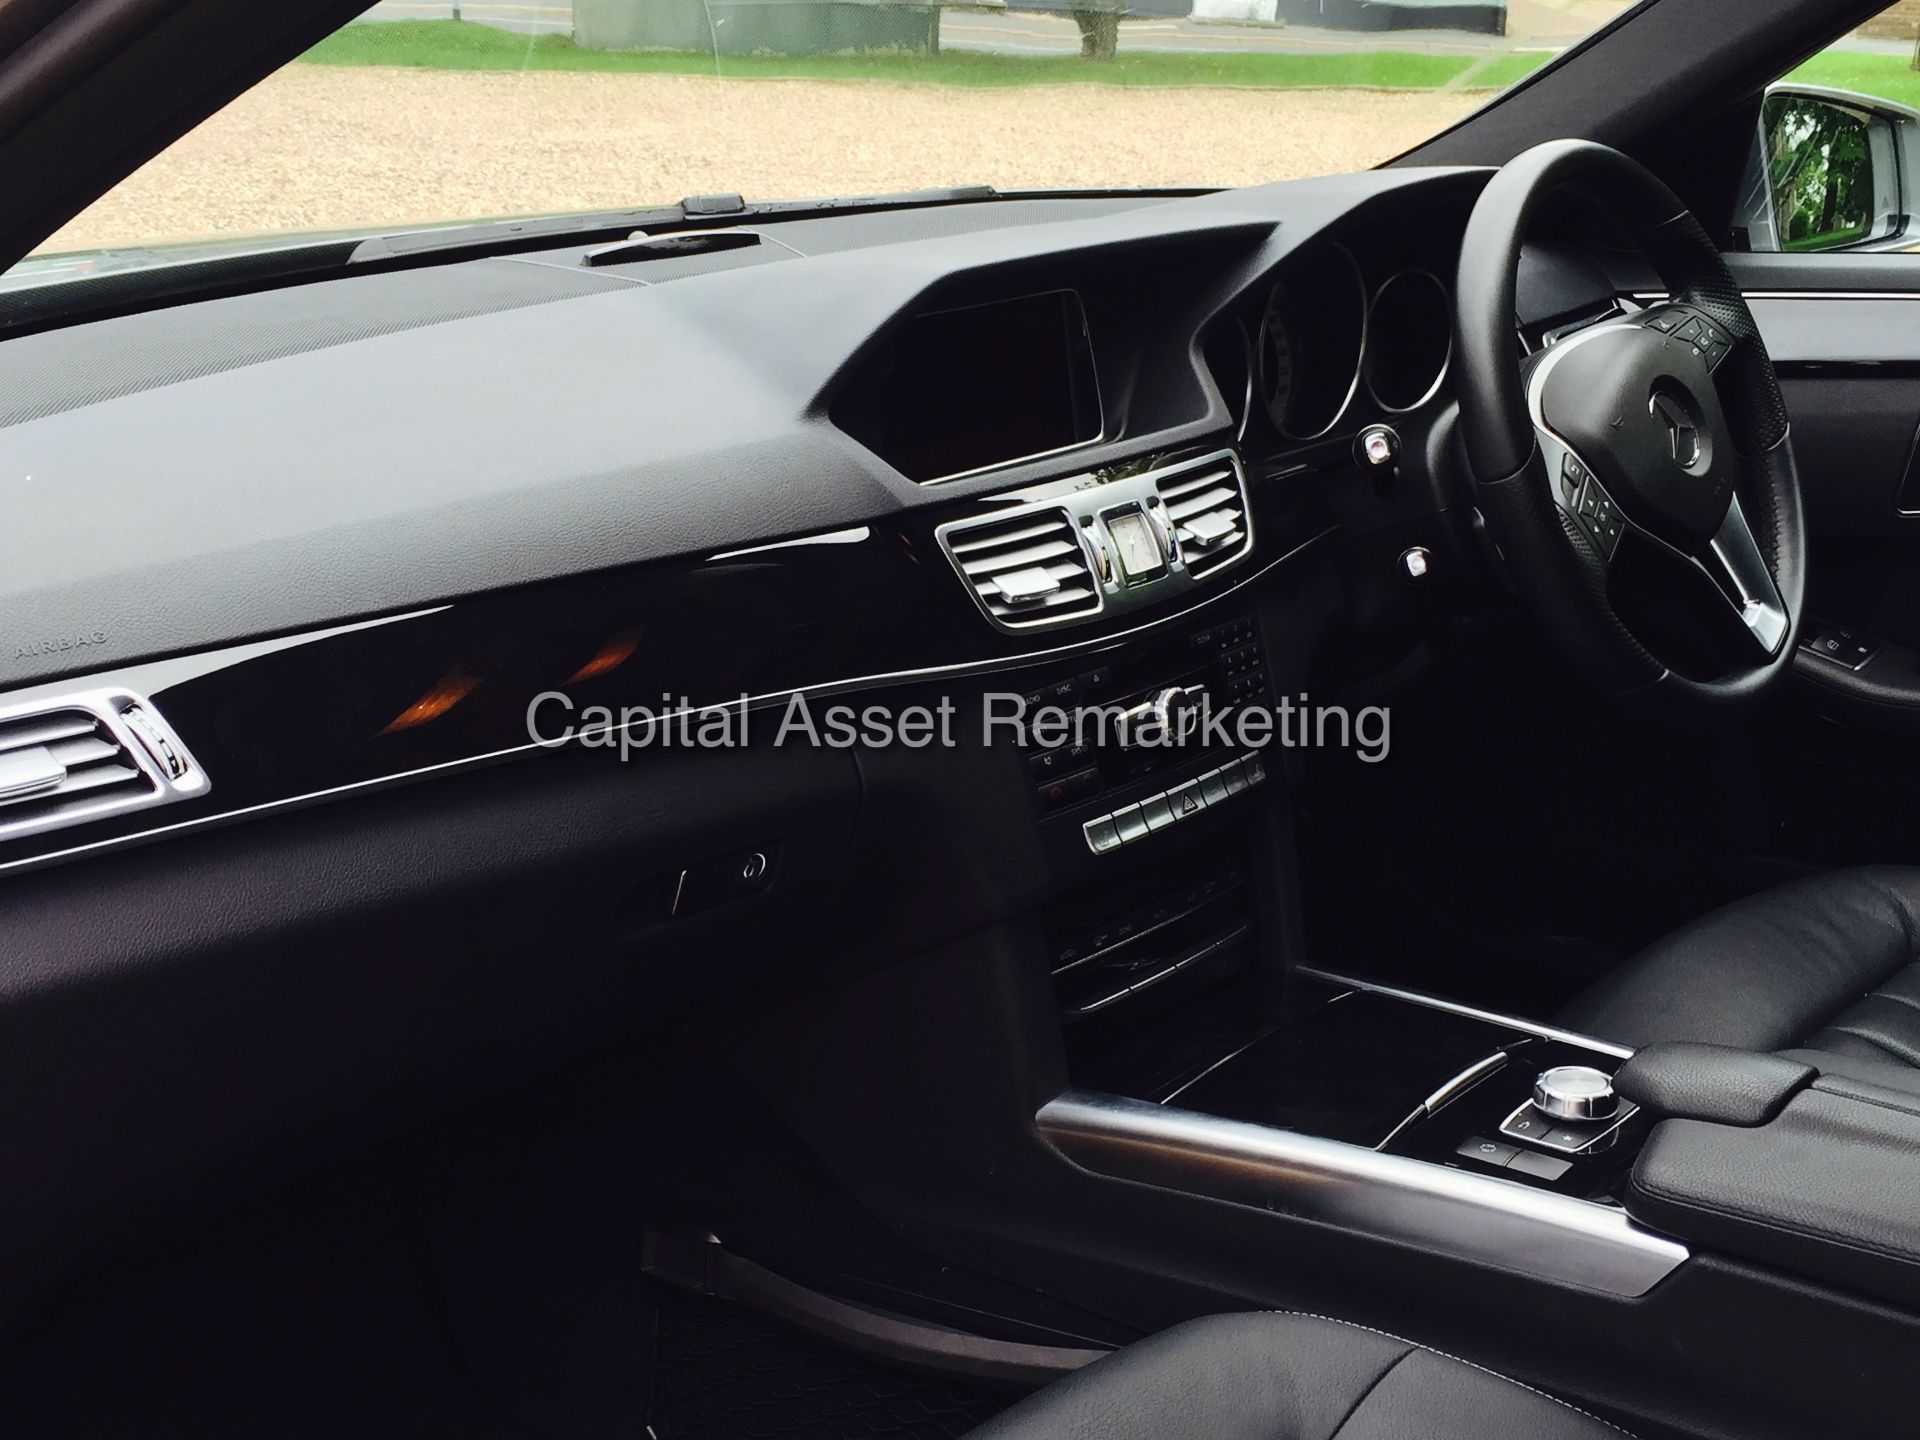 MERCEDES-BENZ E220 CDI 'BLUETEC' (2014 - 64 REG) LEATHER - AUTO - SAT NAV (1 OWNER FROM NEW) - Image 11 of 18